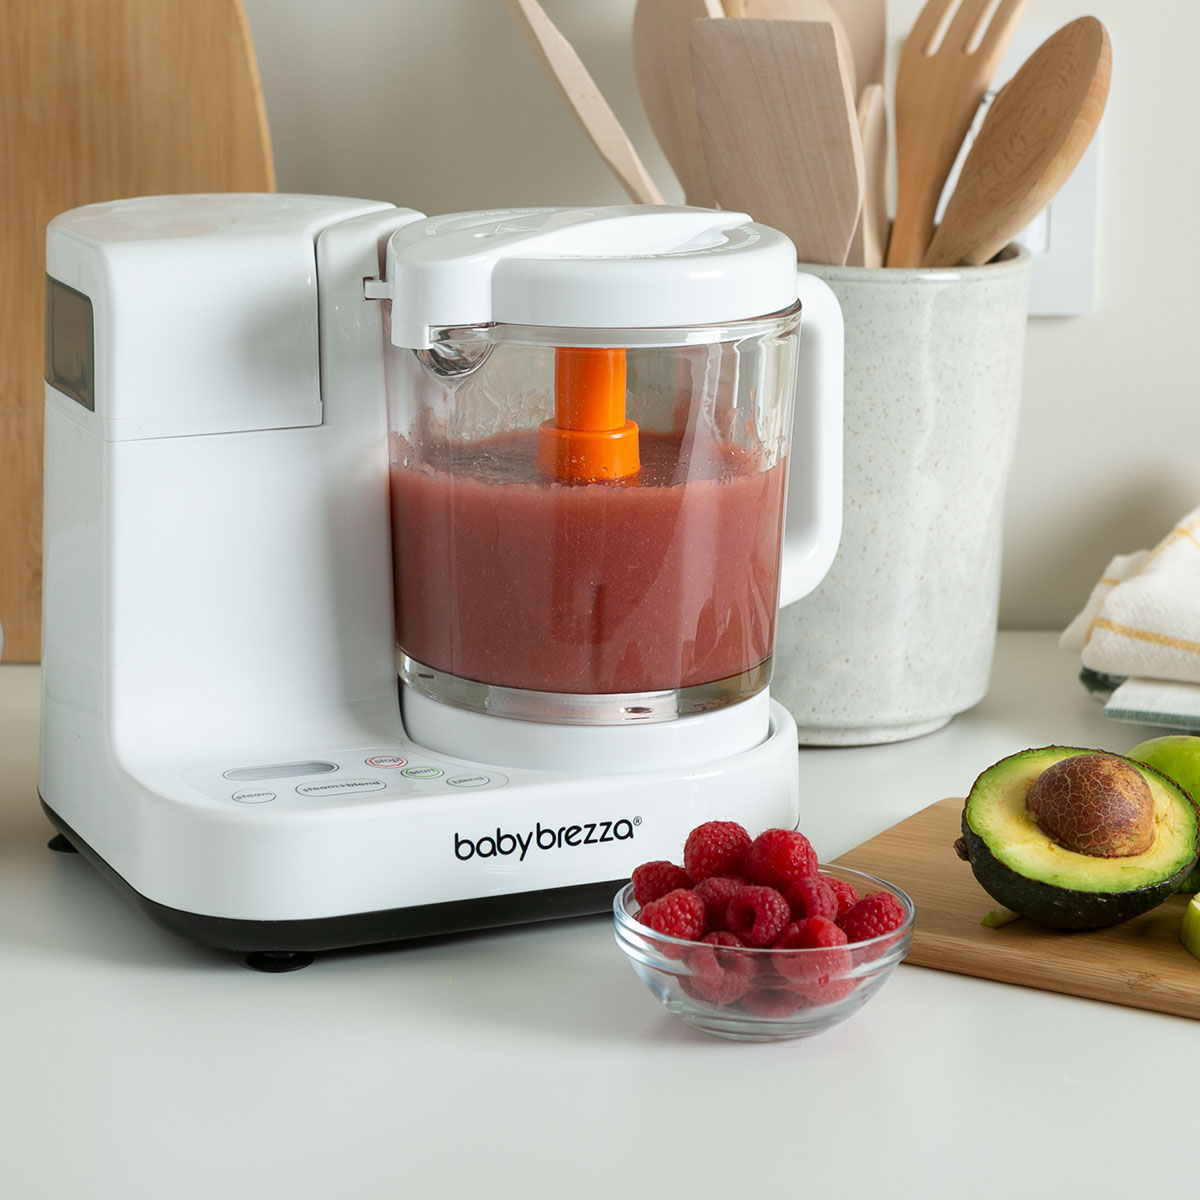 Baby Brezza Glass Baby Food Maker Cooker and Blender to Steams in Glass Bowl - 4 Cup Capacity Glass Food Maker - image 2 of 6